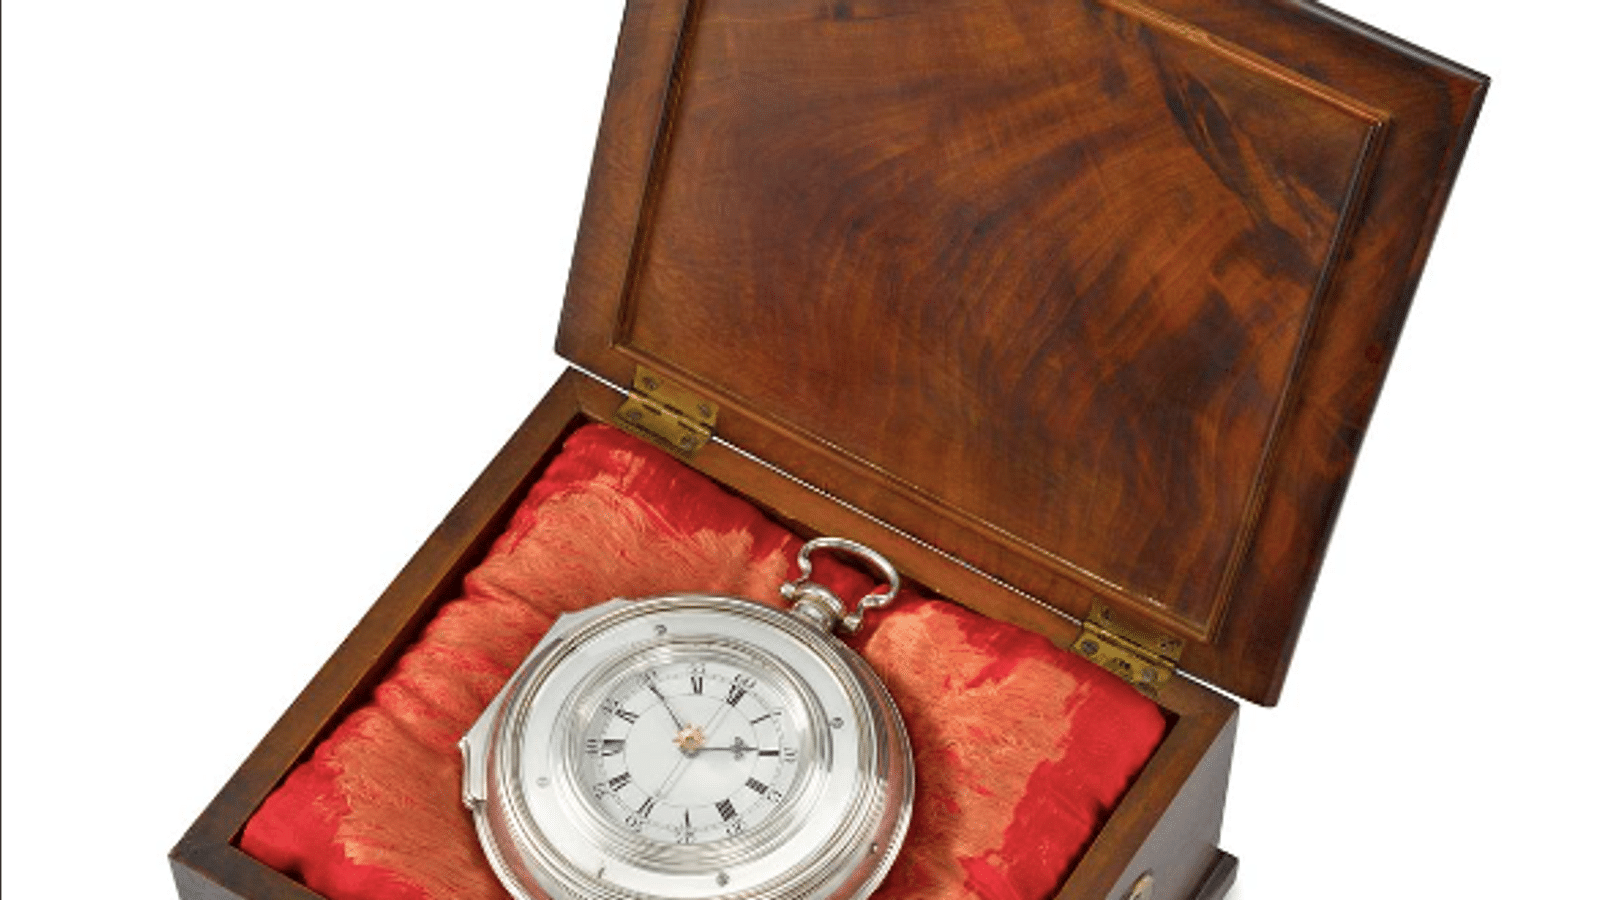 Maritime Clocks for Precise Timekeeping on Board Ships at Sea